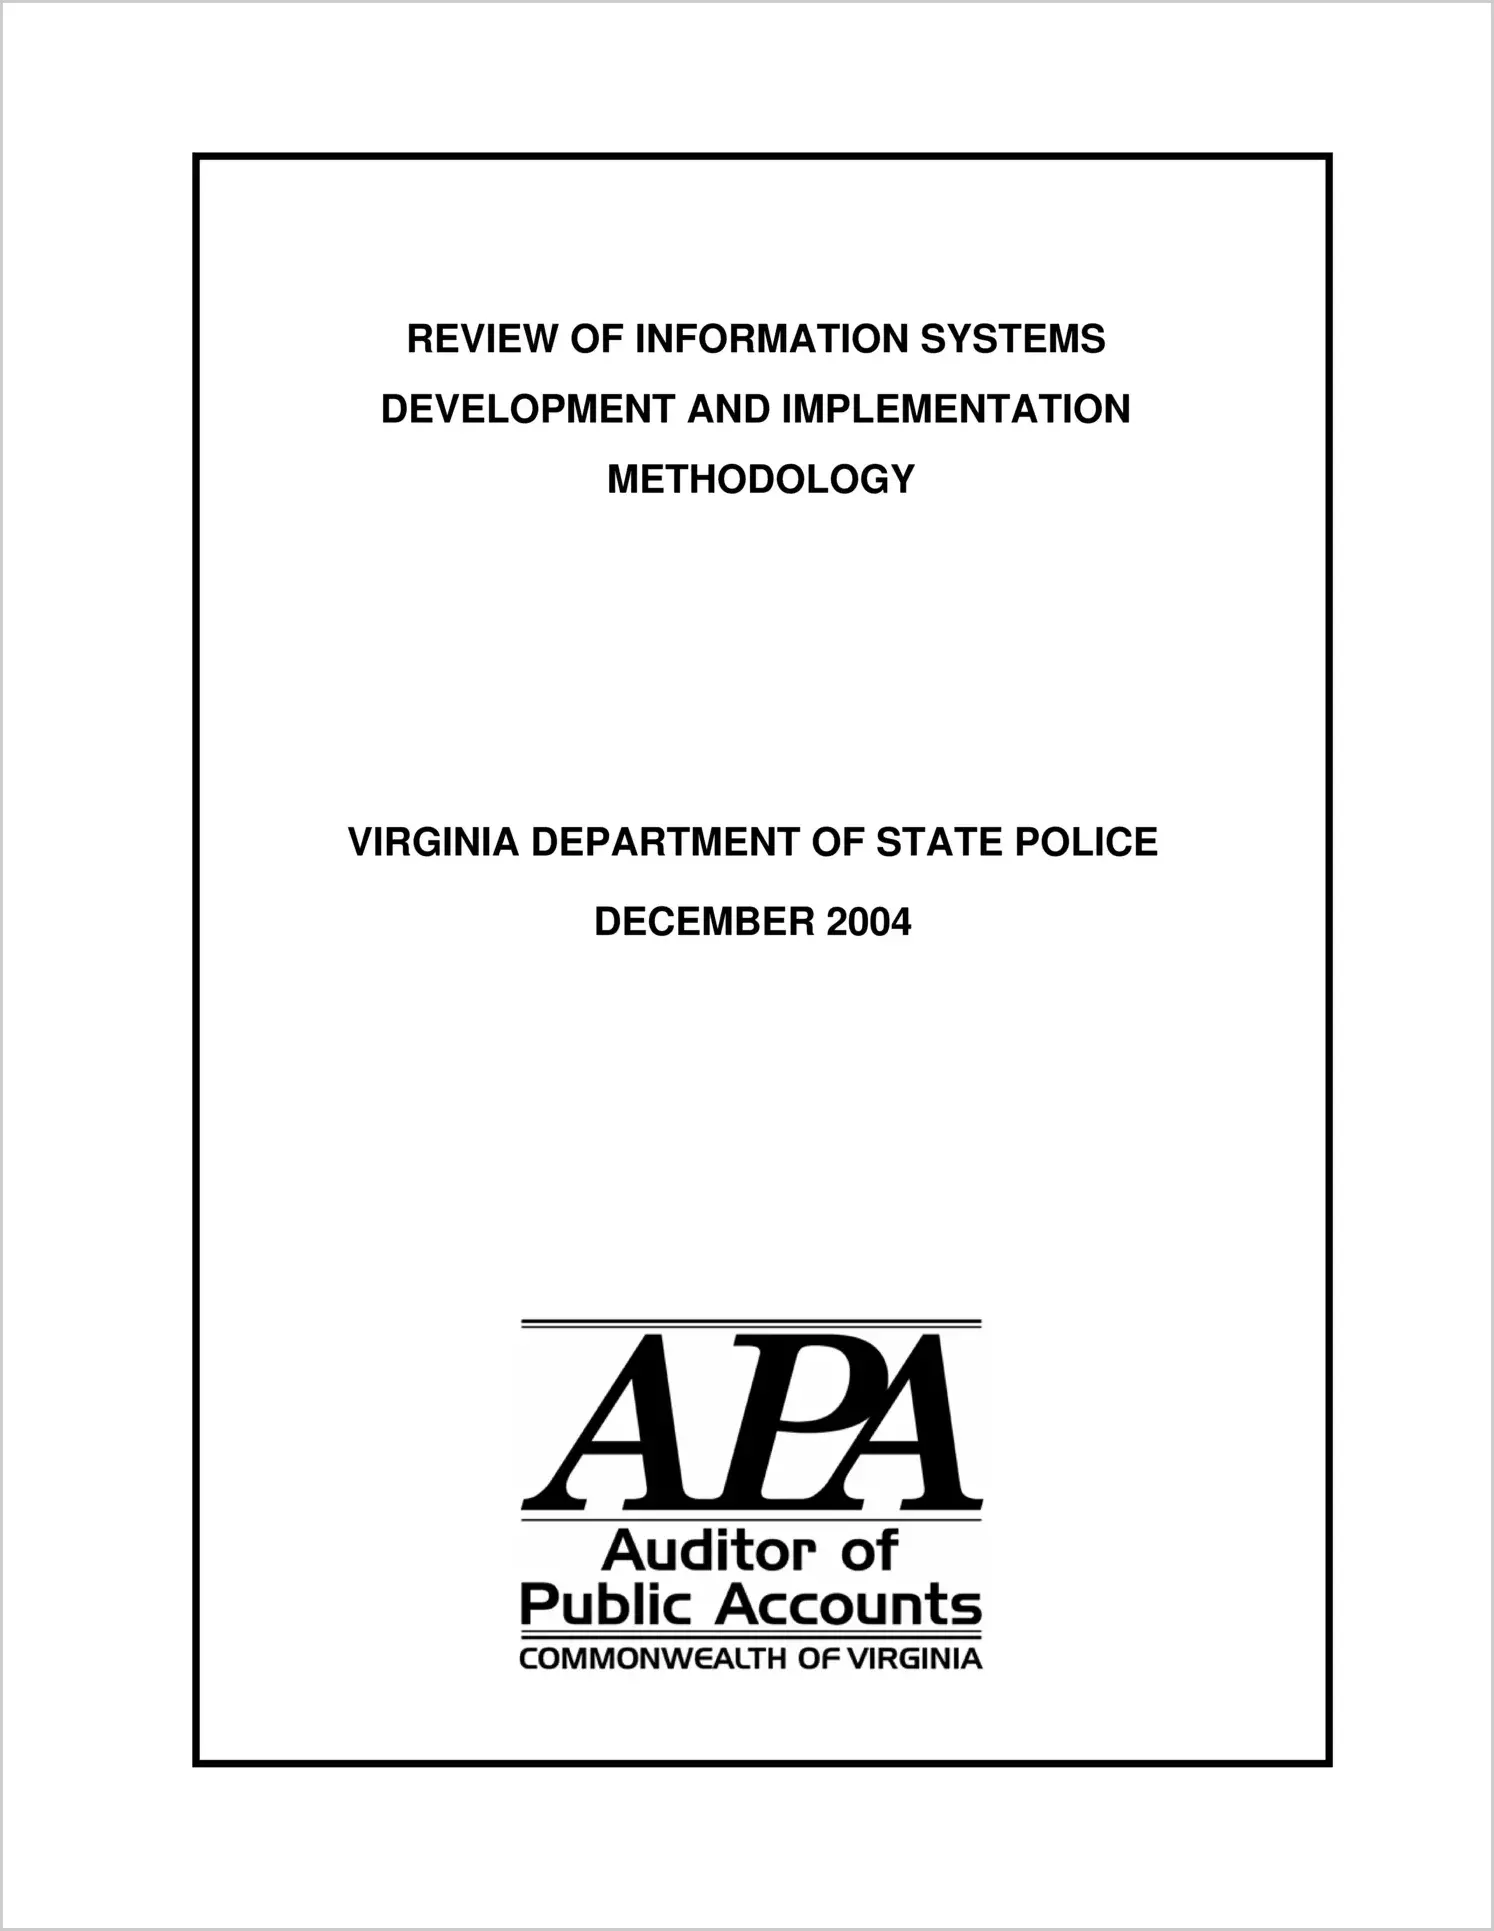 Special Report Virginia Department of State Police( December 2004)